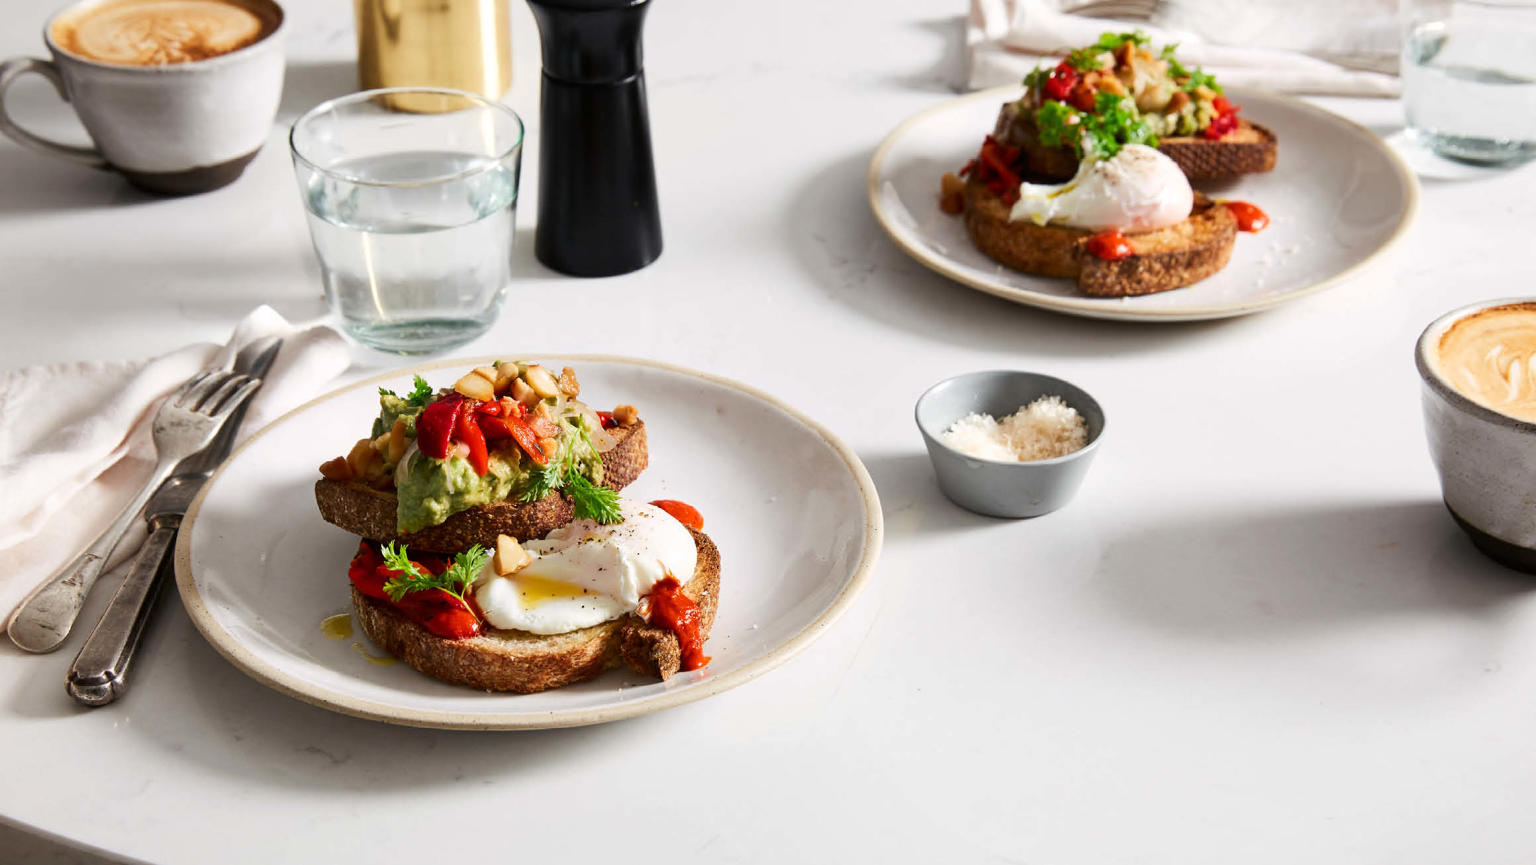 An image featuring a beautifully presented breakfast spread on a table. There are two plates with toast, creamy smashed avocado, poached eggs, and a roasted capsicum garnish. The table is further adorned with cups of coffee, neatly arranged cutlery, salt and pepper shakers, and a small bowl of grated cheese. 